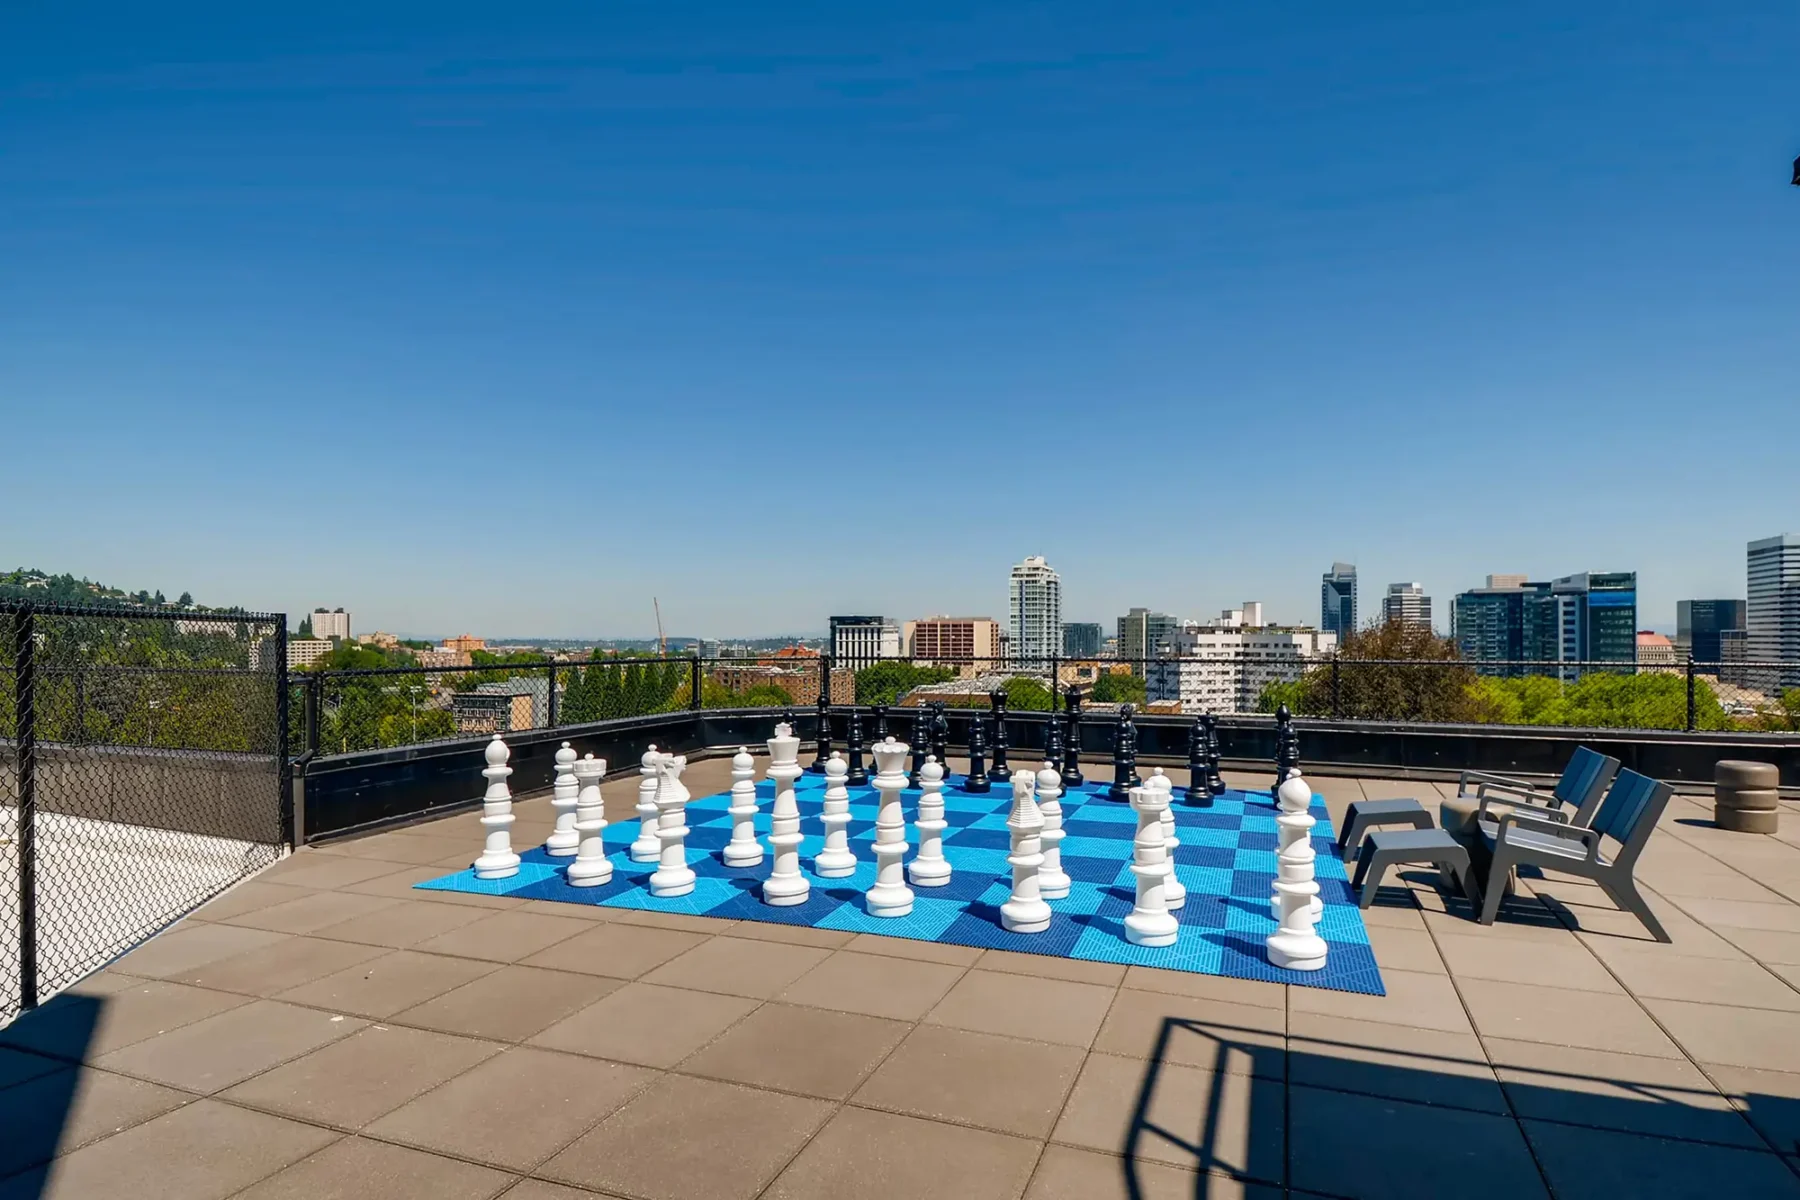 Rooftop with city skyline views, giant chess set